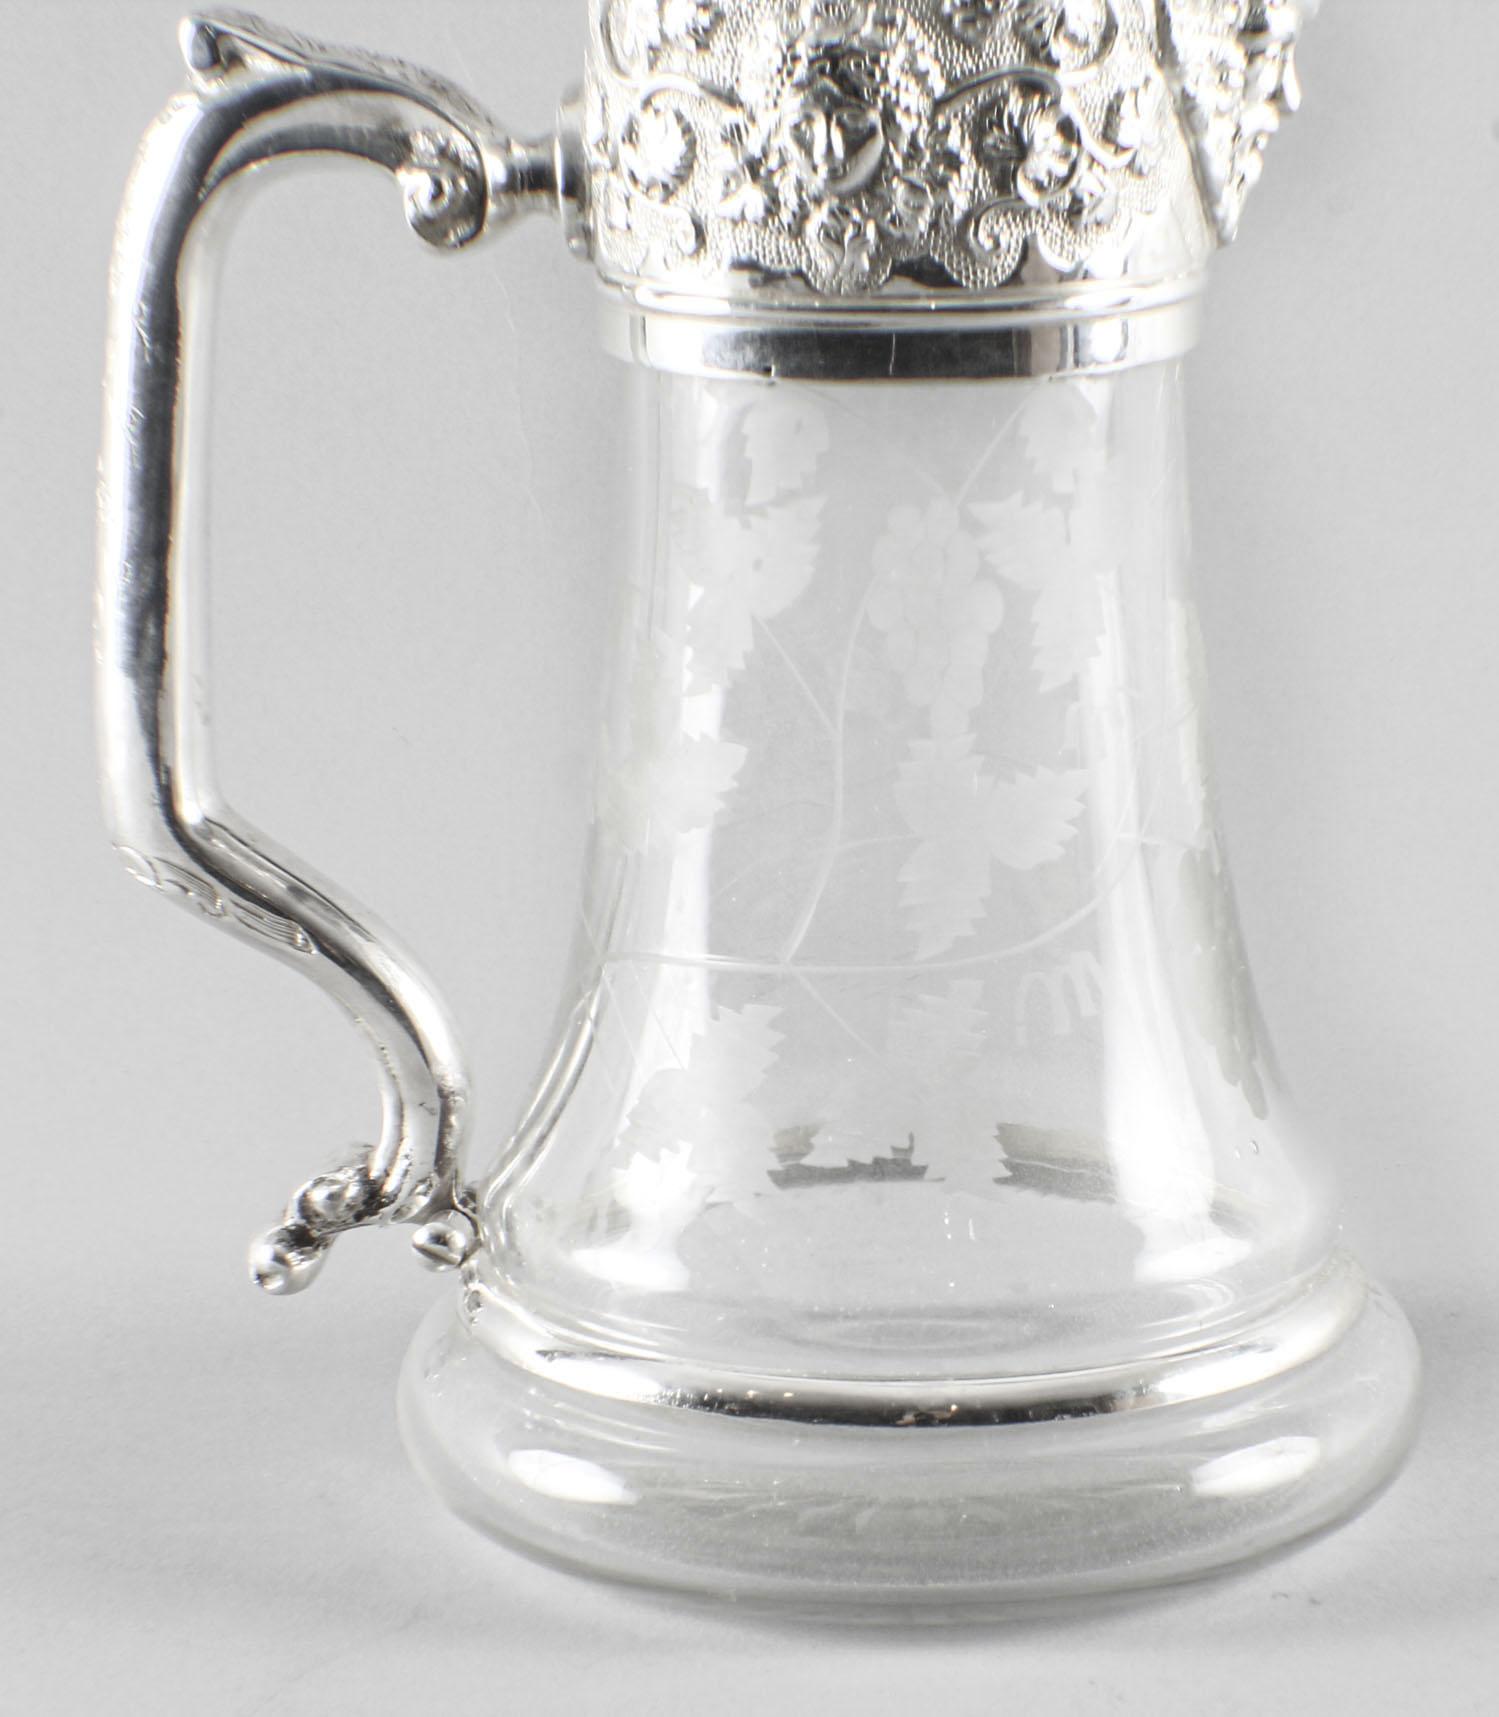 This is a very attractive vintage silver plated claret jug with lion rampant shield and engraved glass dating from the second half of the 20th Century.

A highly versatile piece that can serve decorative as well as practical purposes.

Add an